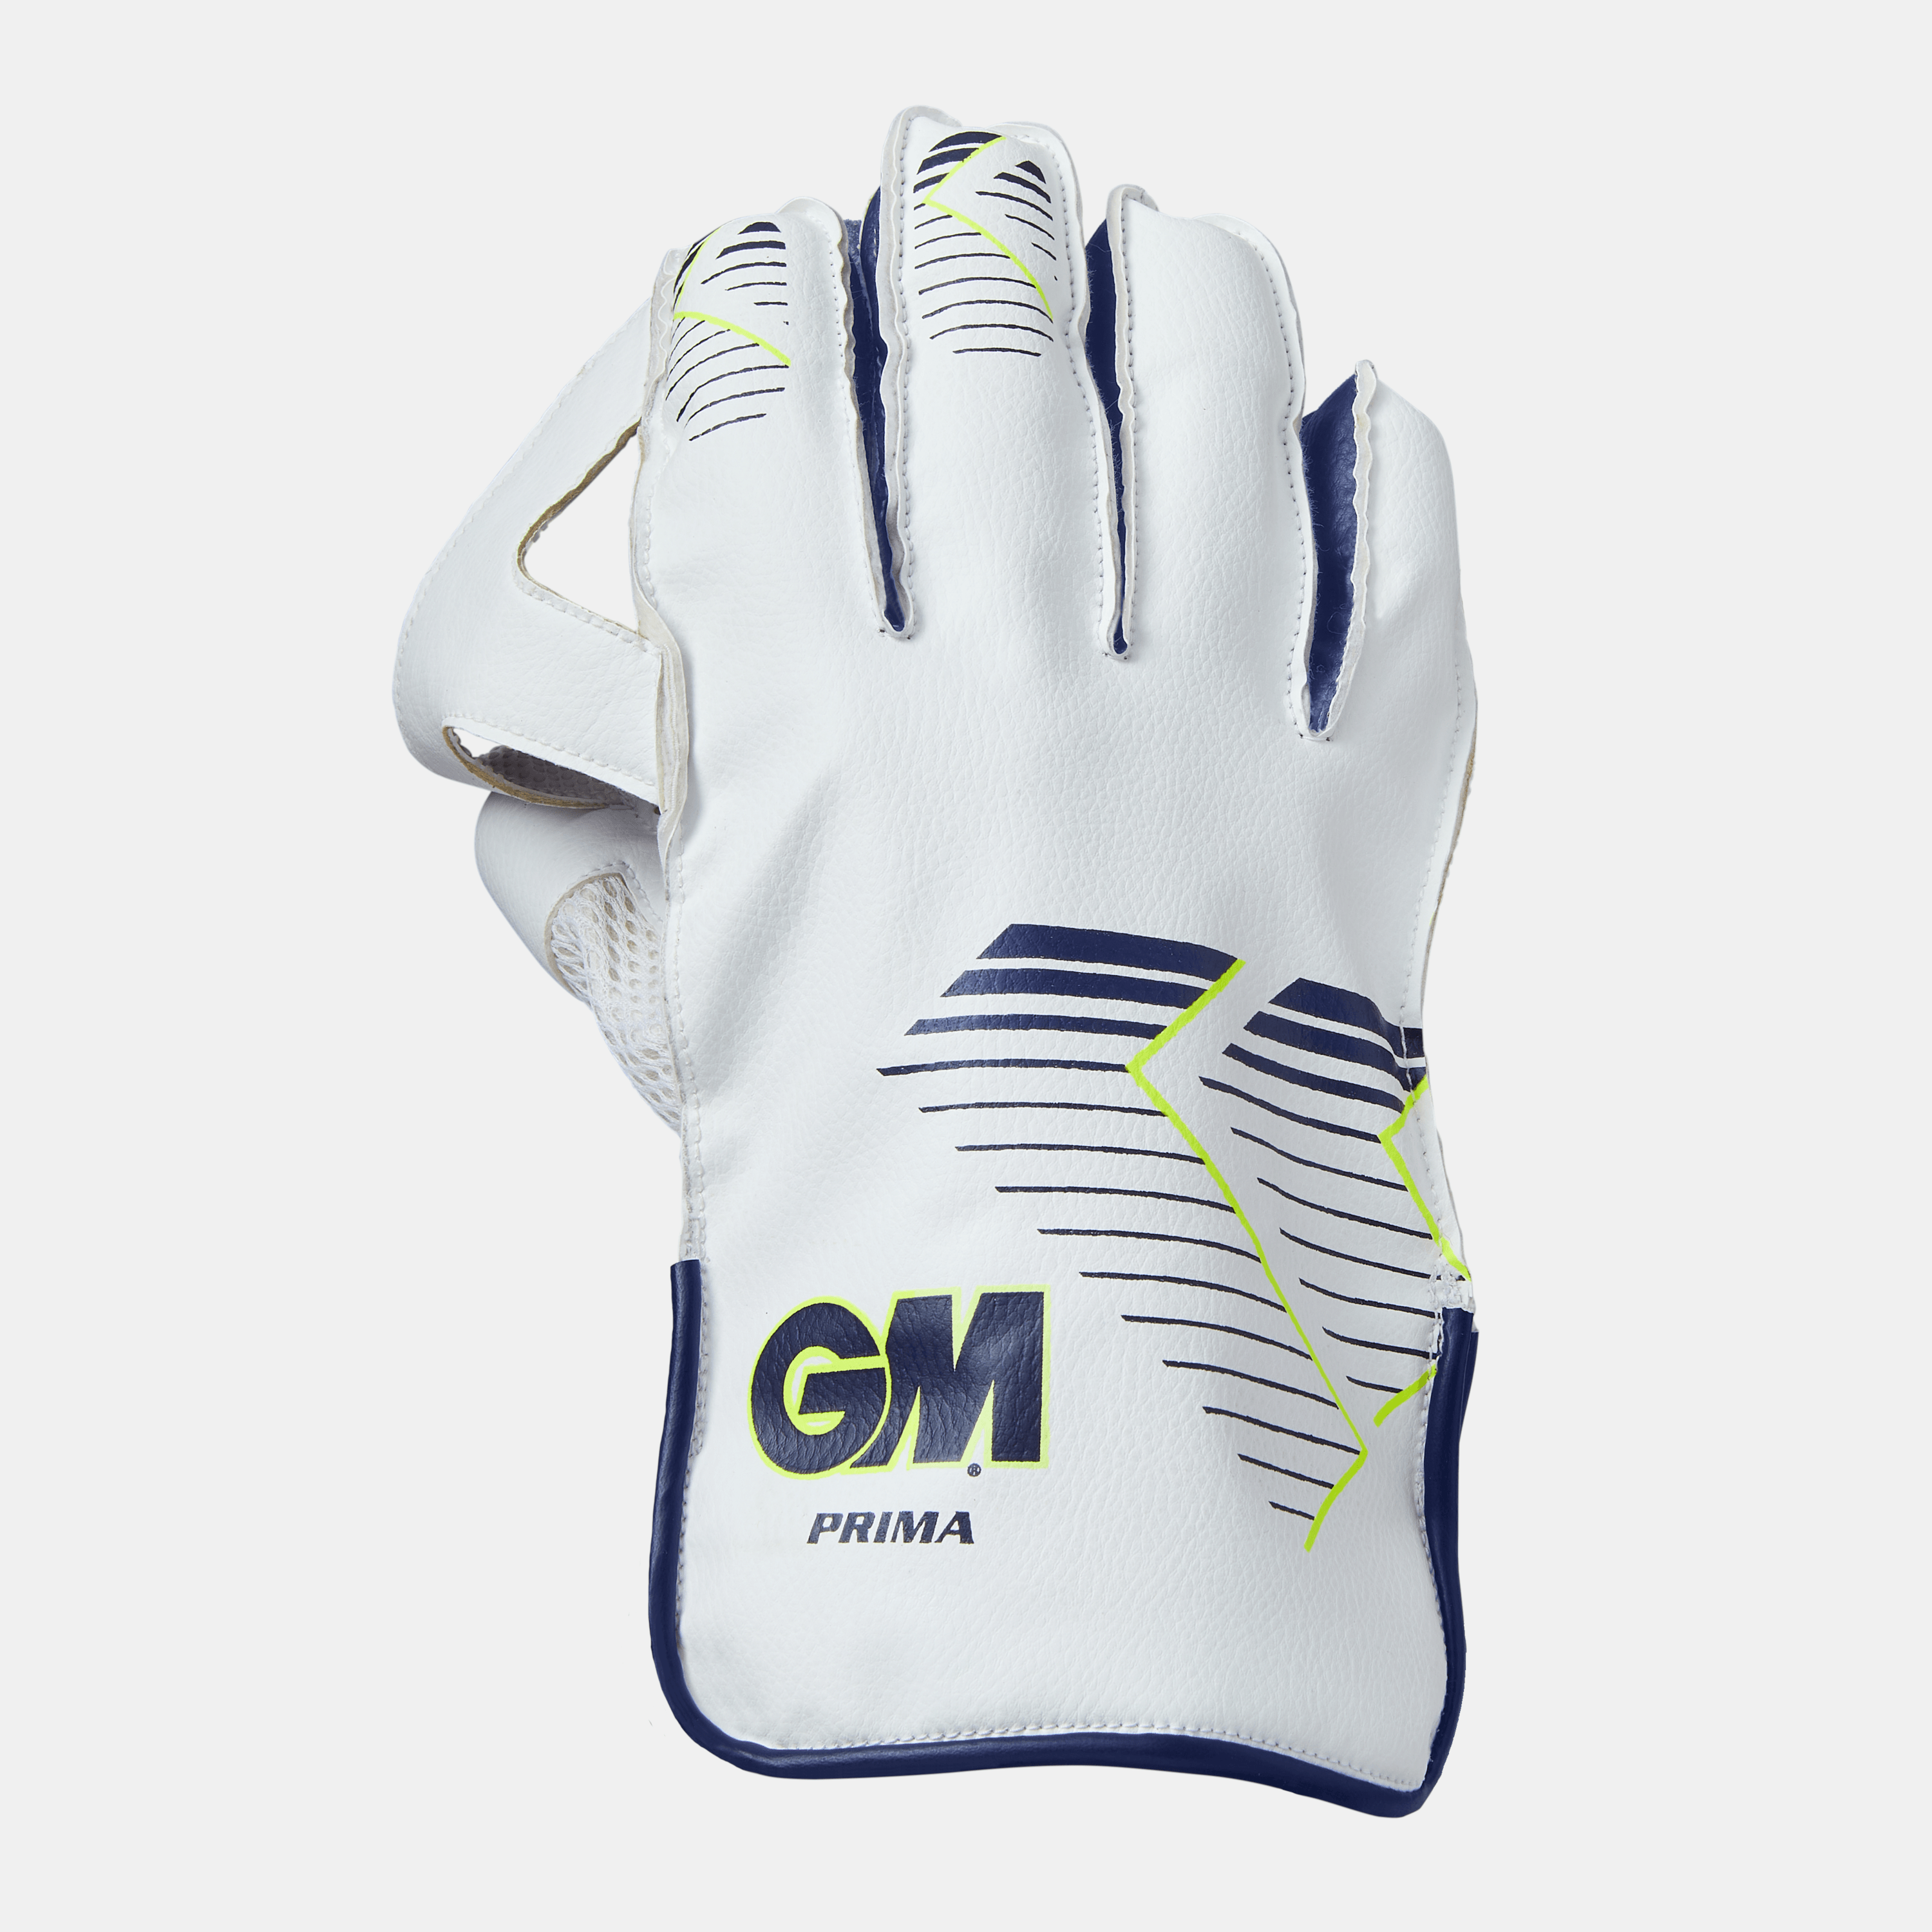 GM Prima Wicket Keeping Gloves - YOUTH - AT Sports